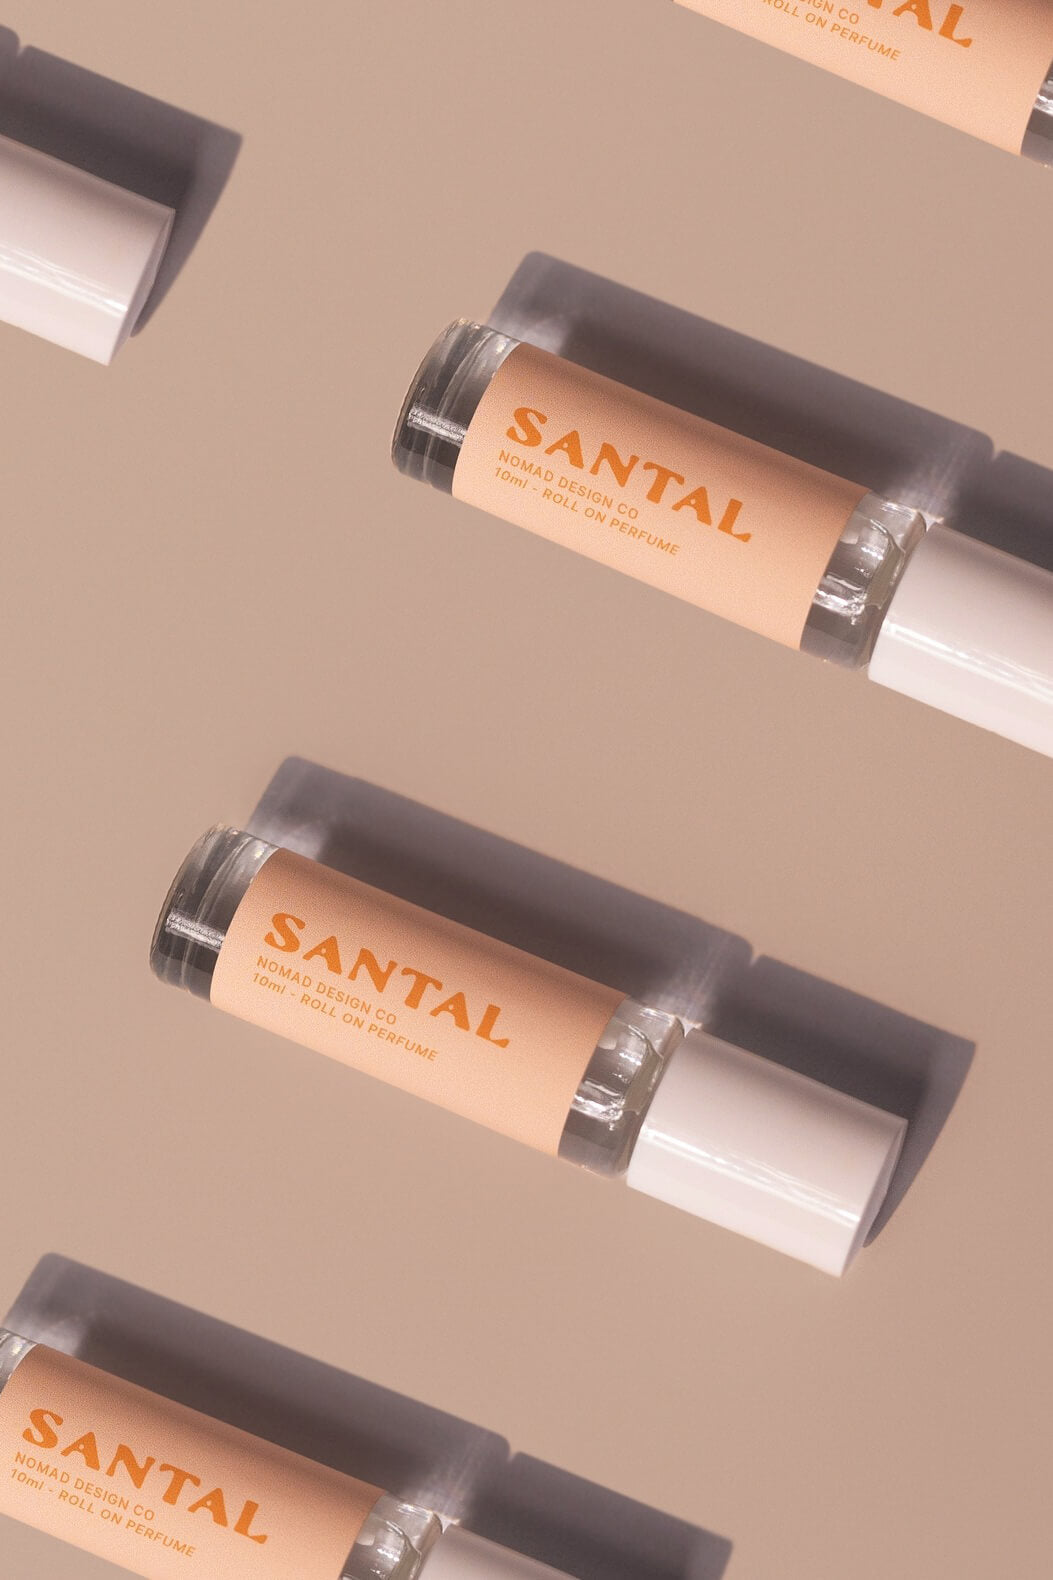 santal perfume by nomad design co.